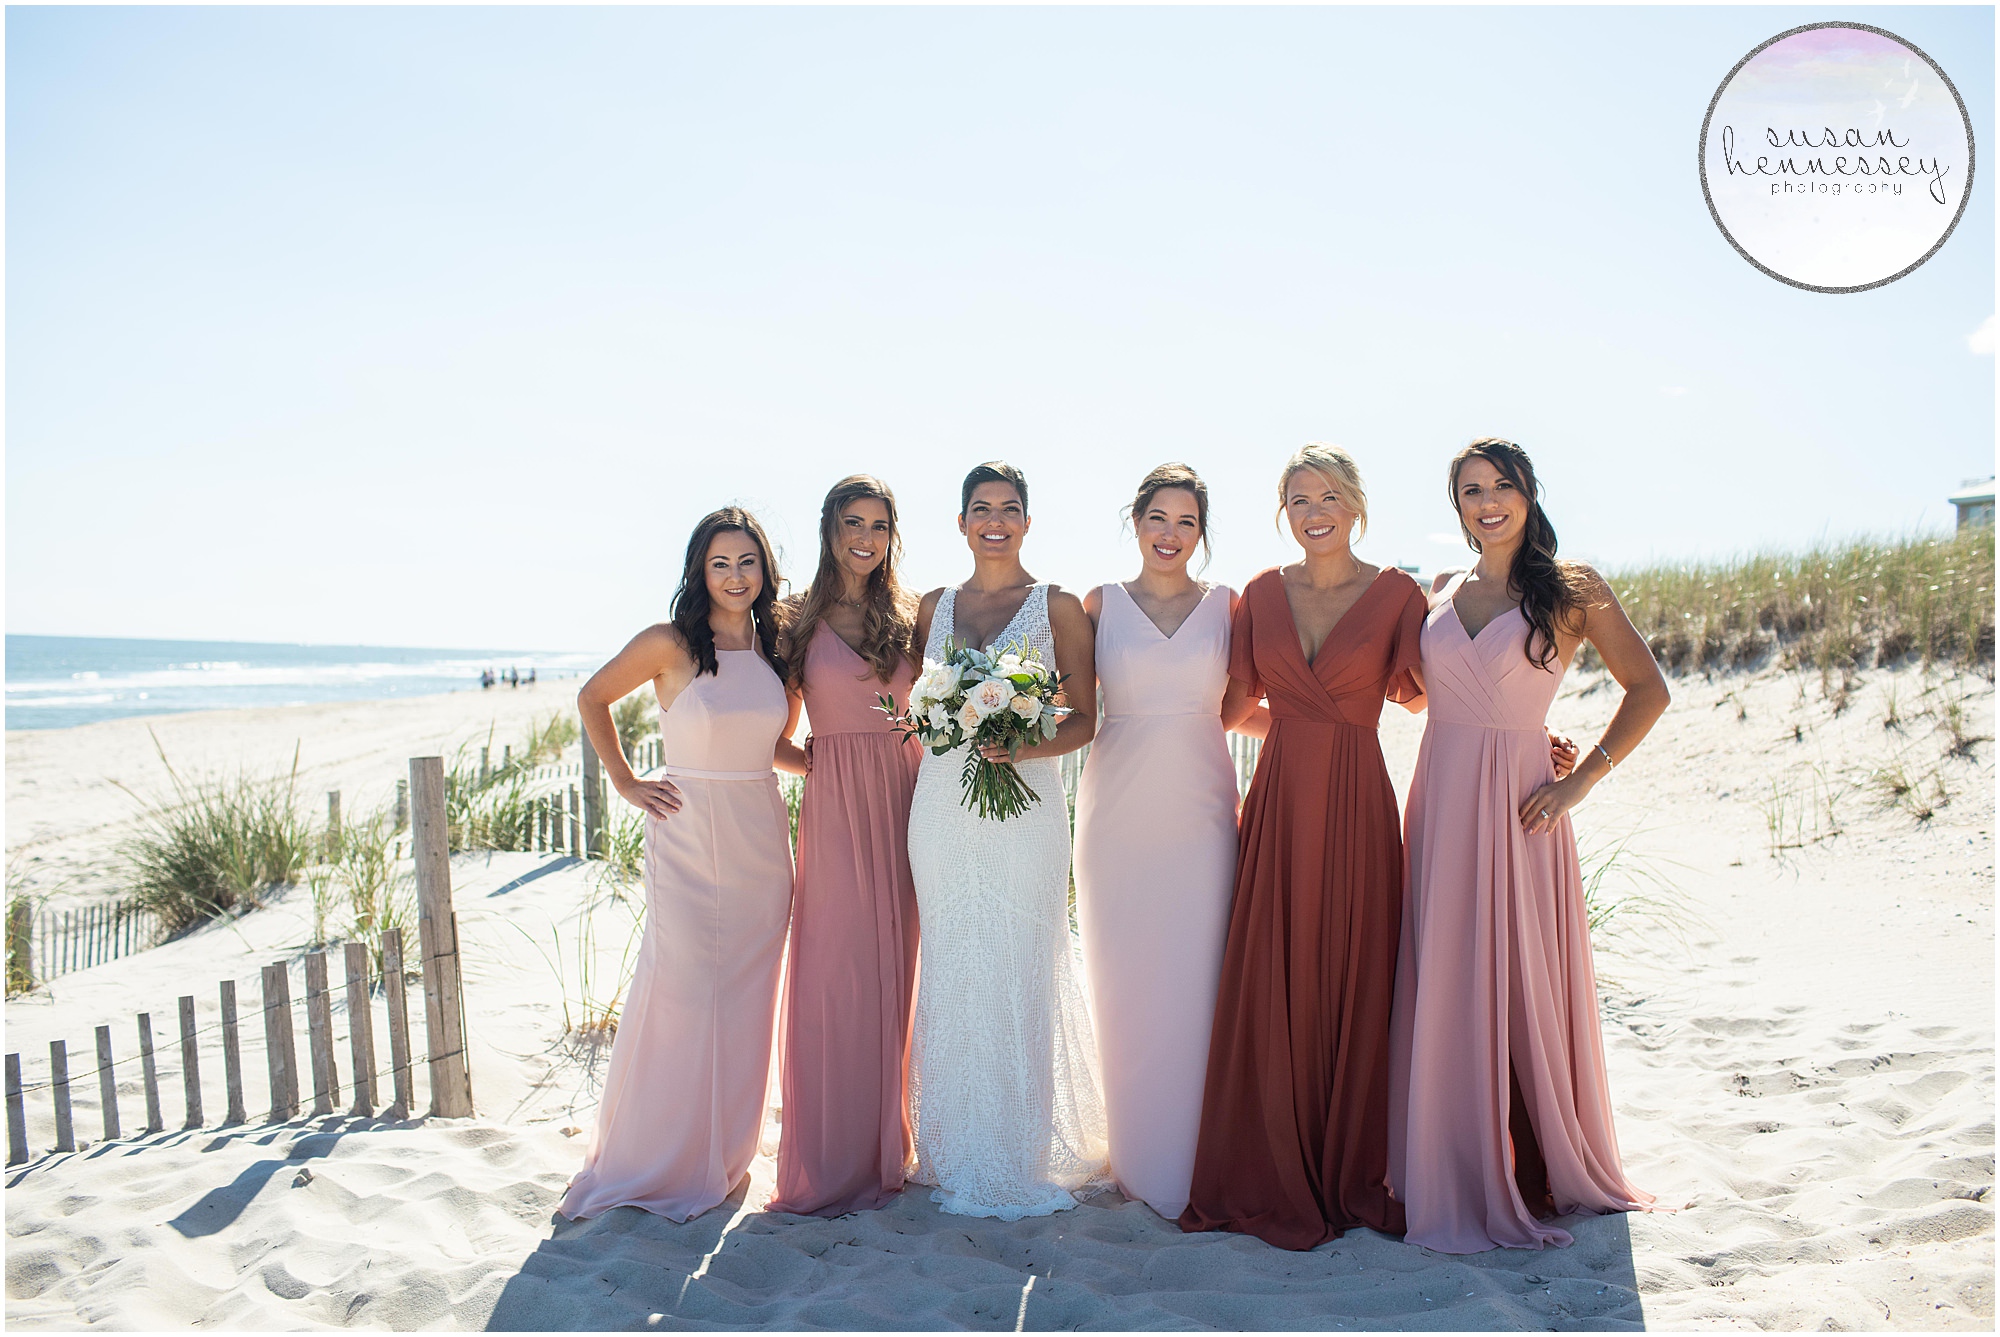 Bride and bridesmaids on beach before ceremony 